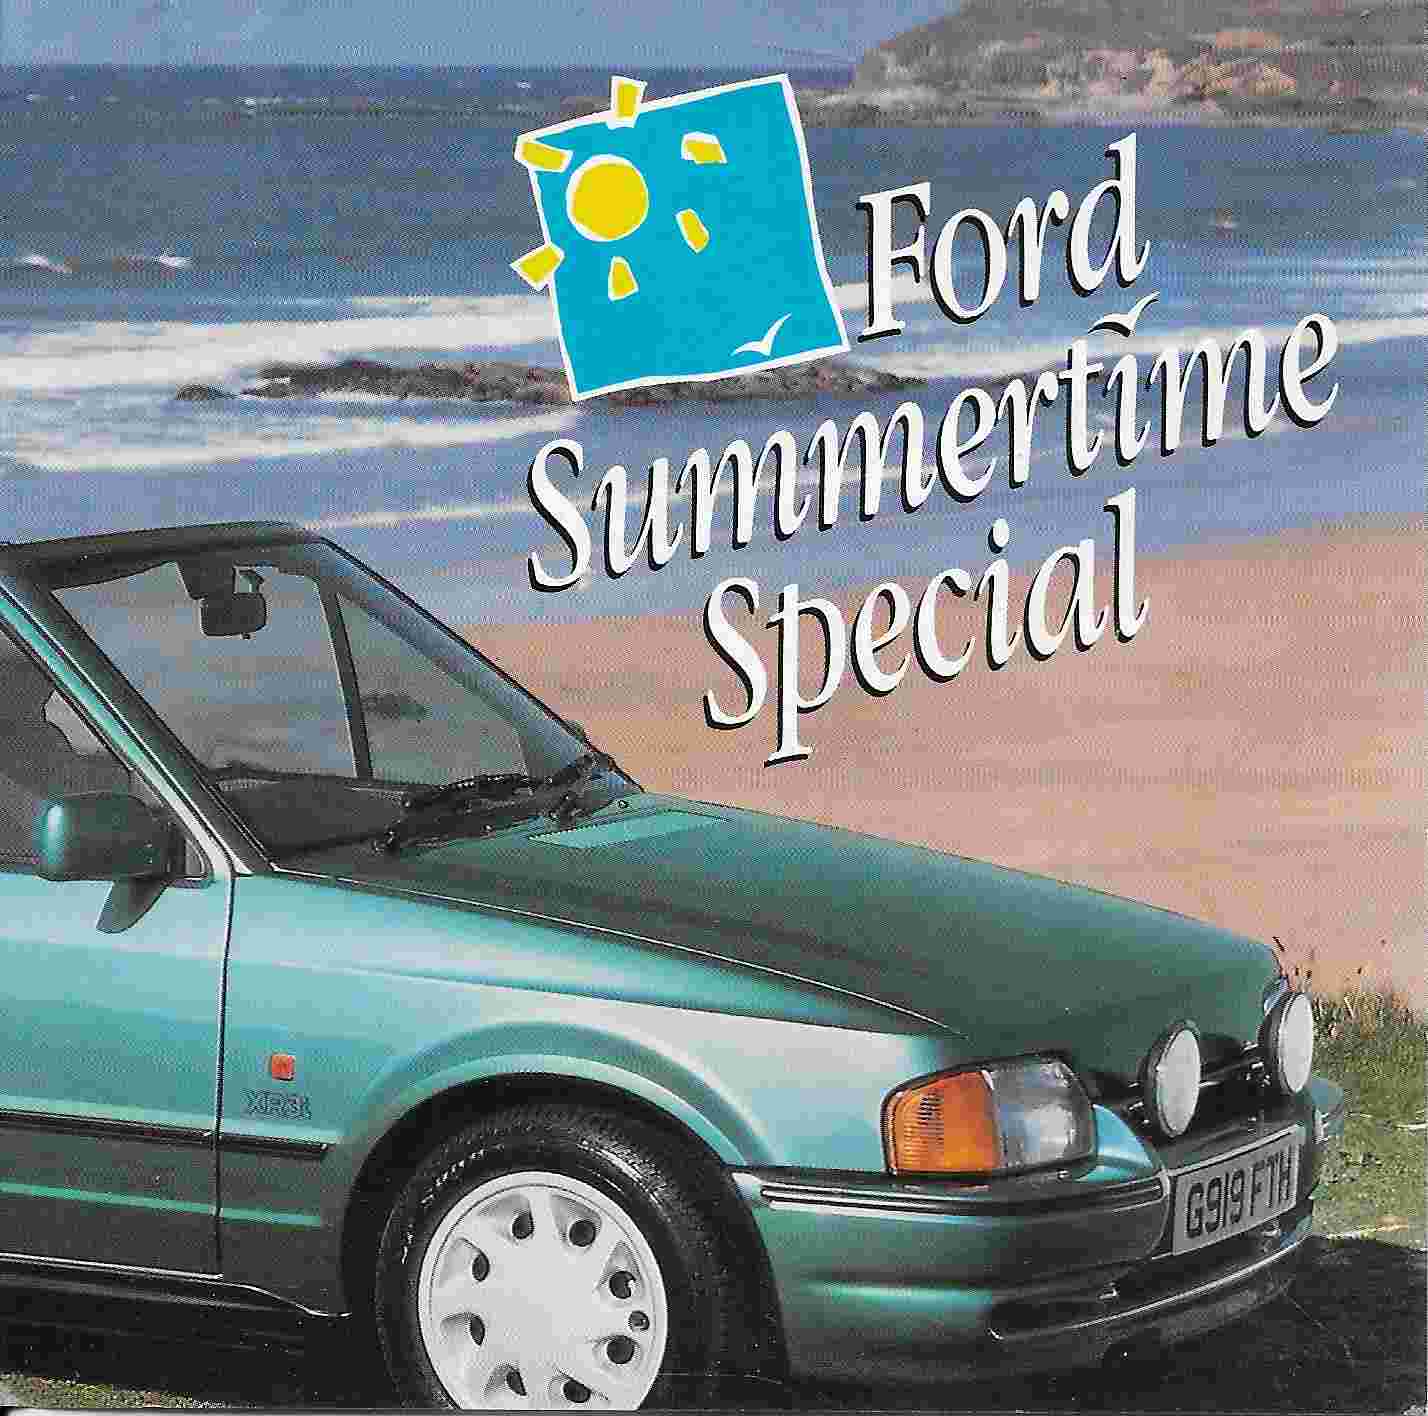 Picture of Ford summertime special by artist Various 